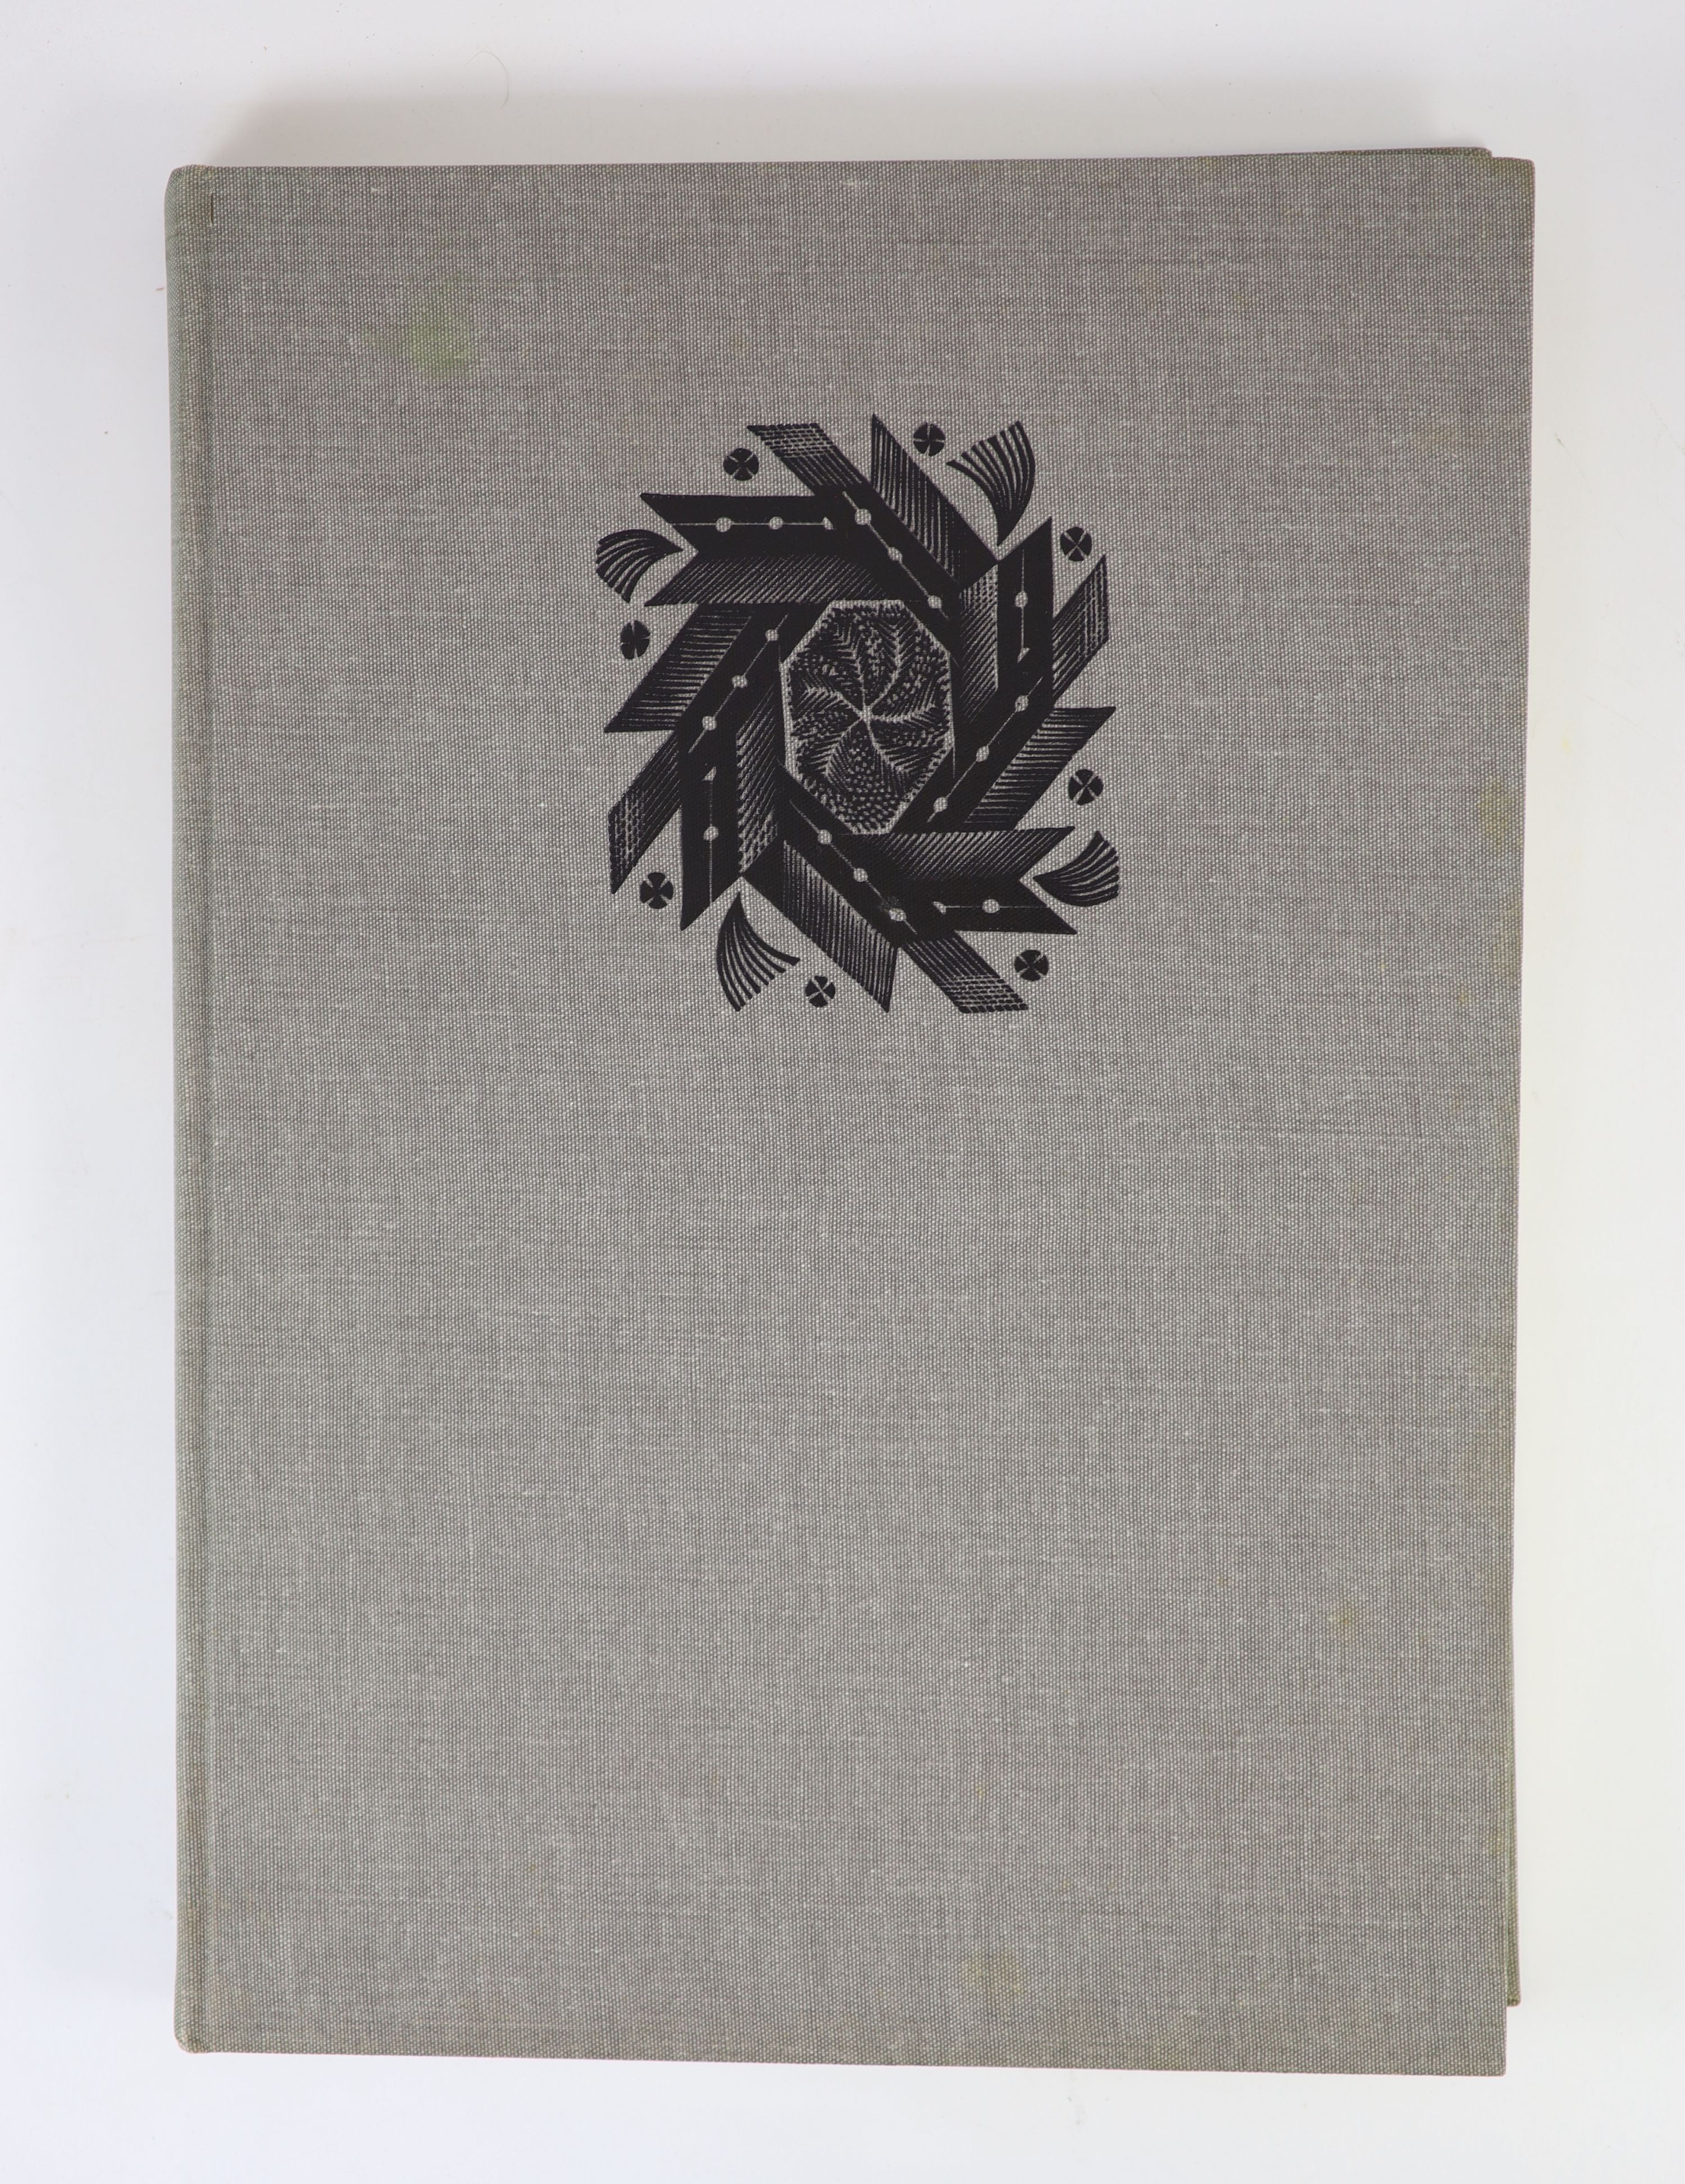 Ravilious, Eric William - The Wood Engravings of Eric Ravilious, 2nd binding, number 7 of (probably) 500, folio, original cloth, 113 plates, 3 folding, Lion and Unicorn Press, London, 1972